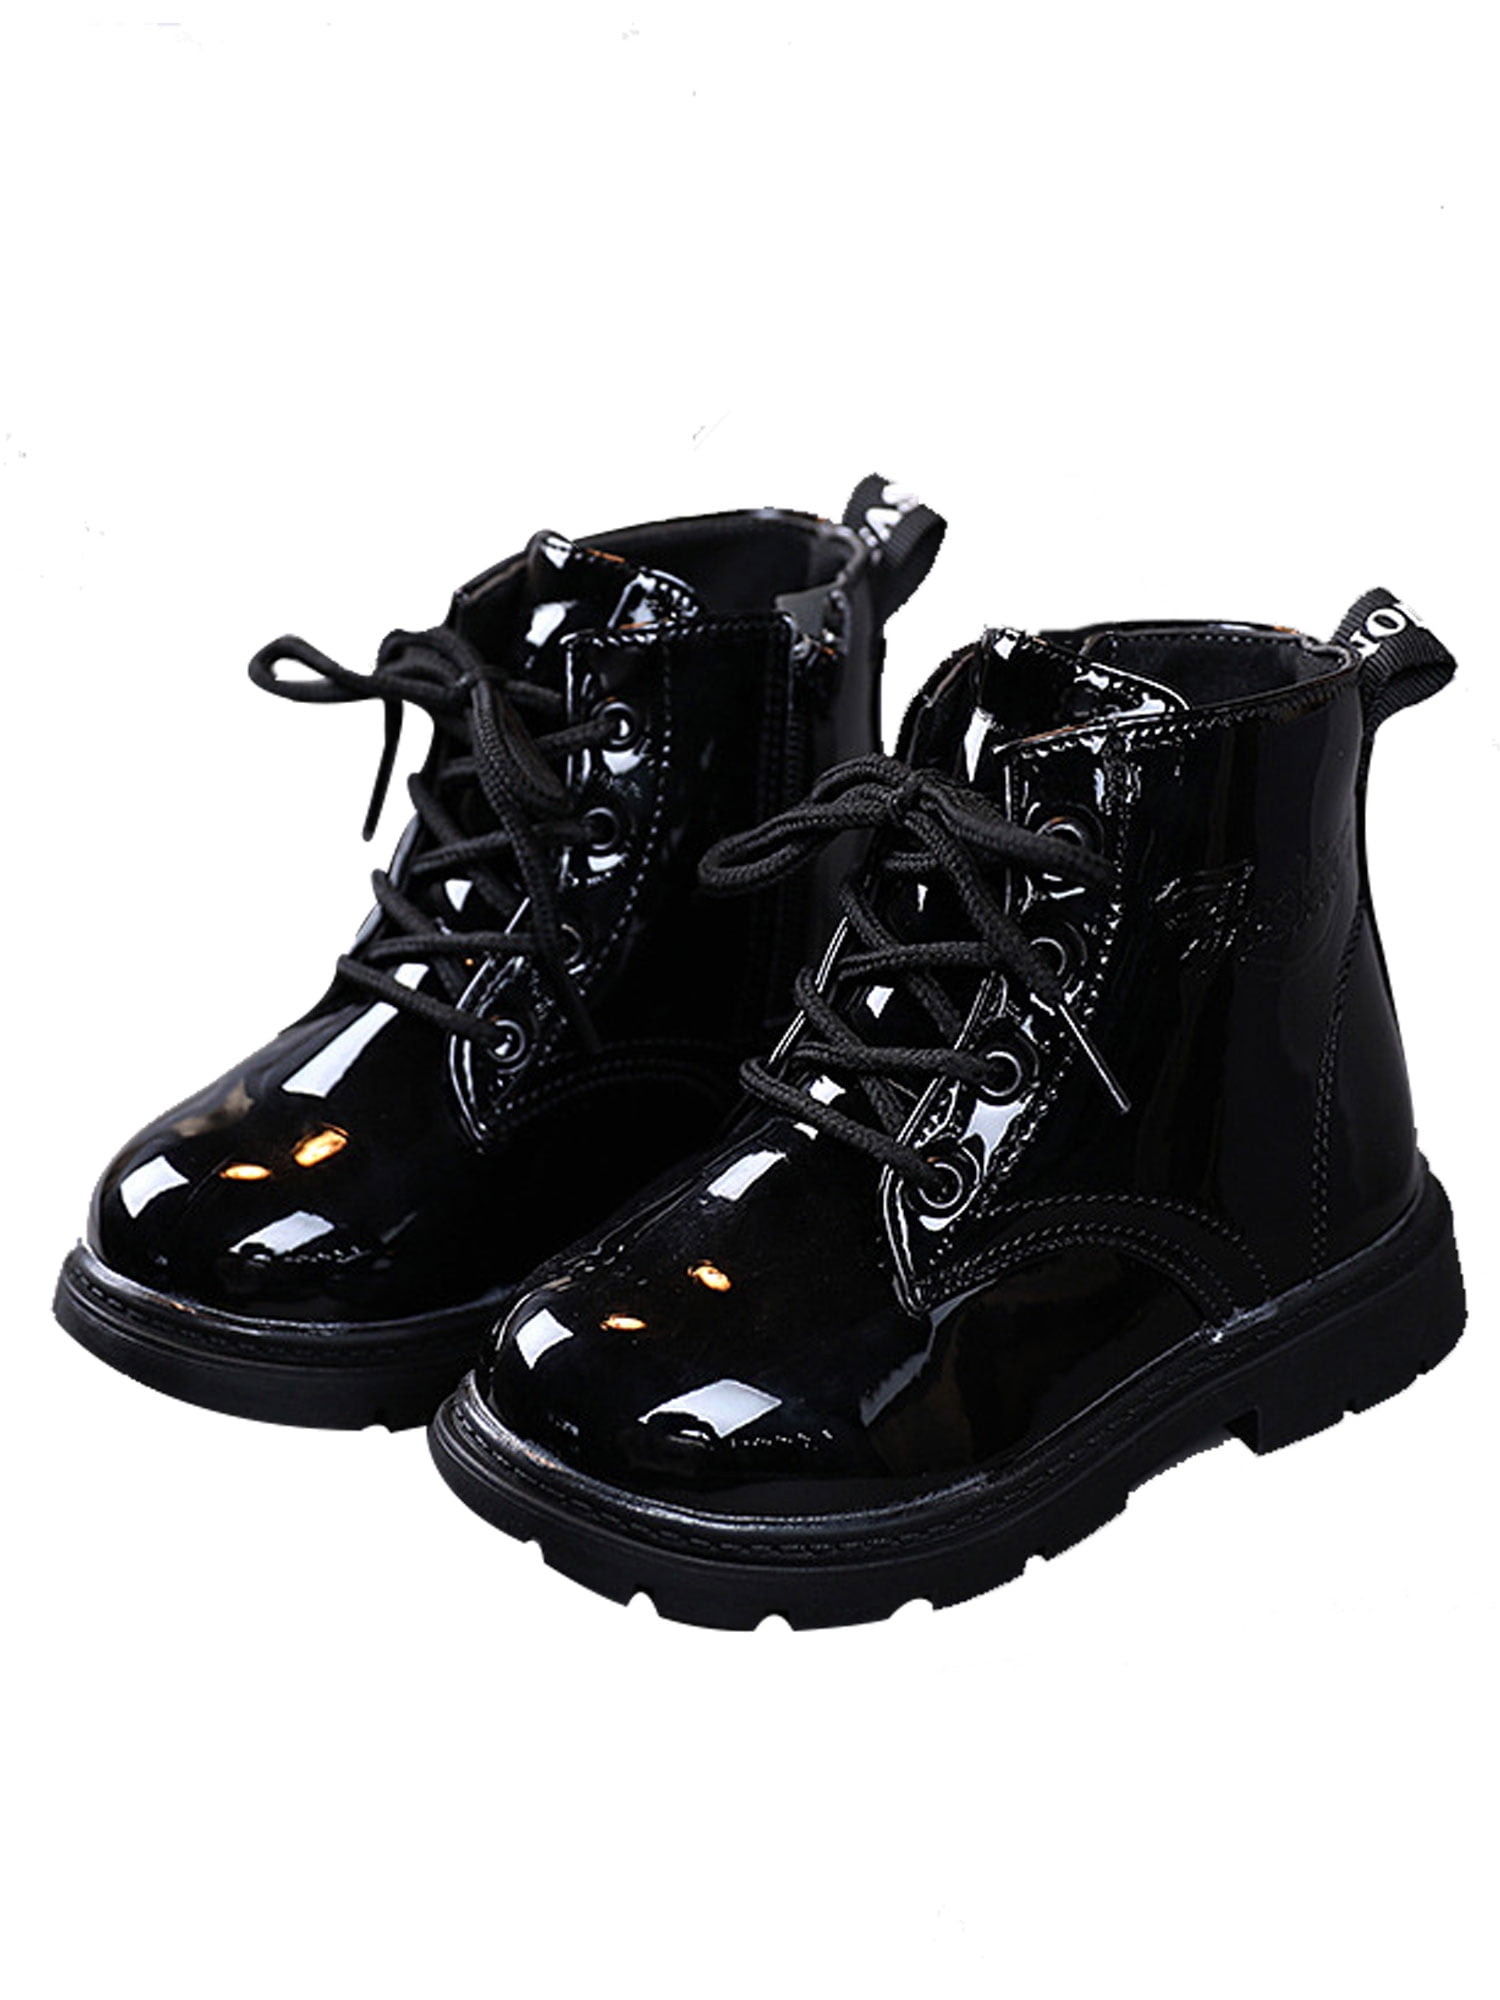 Boys Ankle Boots Girls Kids Camo Army Military Combat Zip Up Casual Winter Shoes 